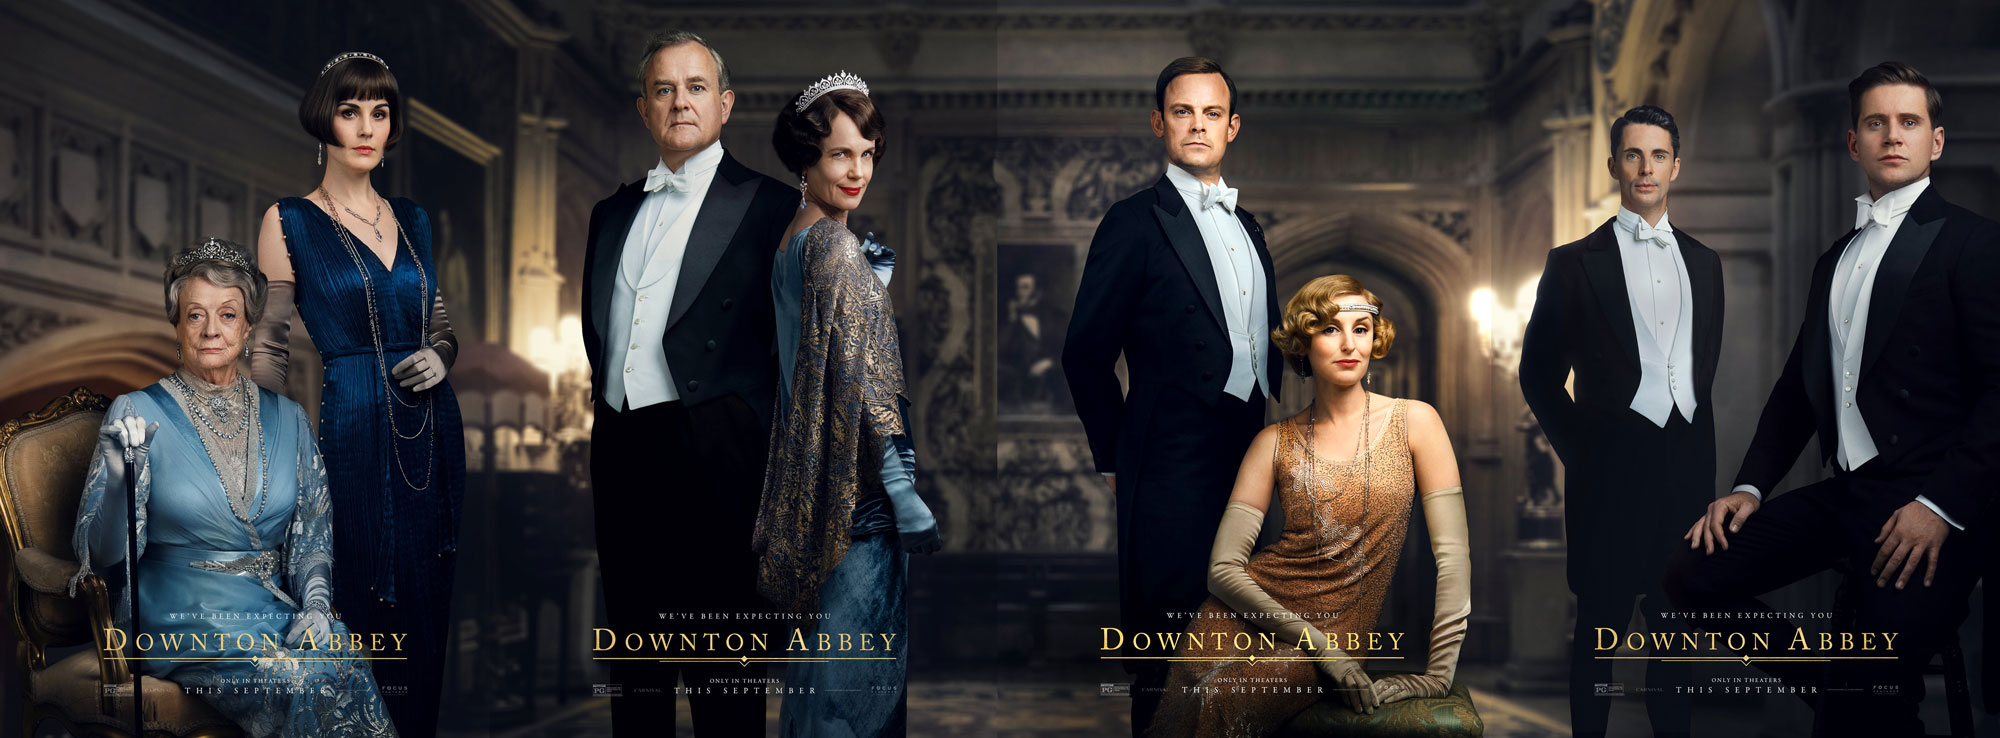 Image result for downton abbey movie poster 2019